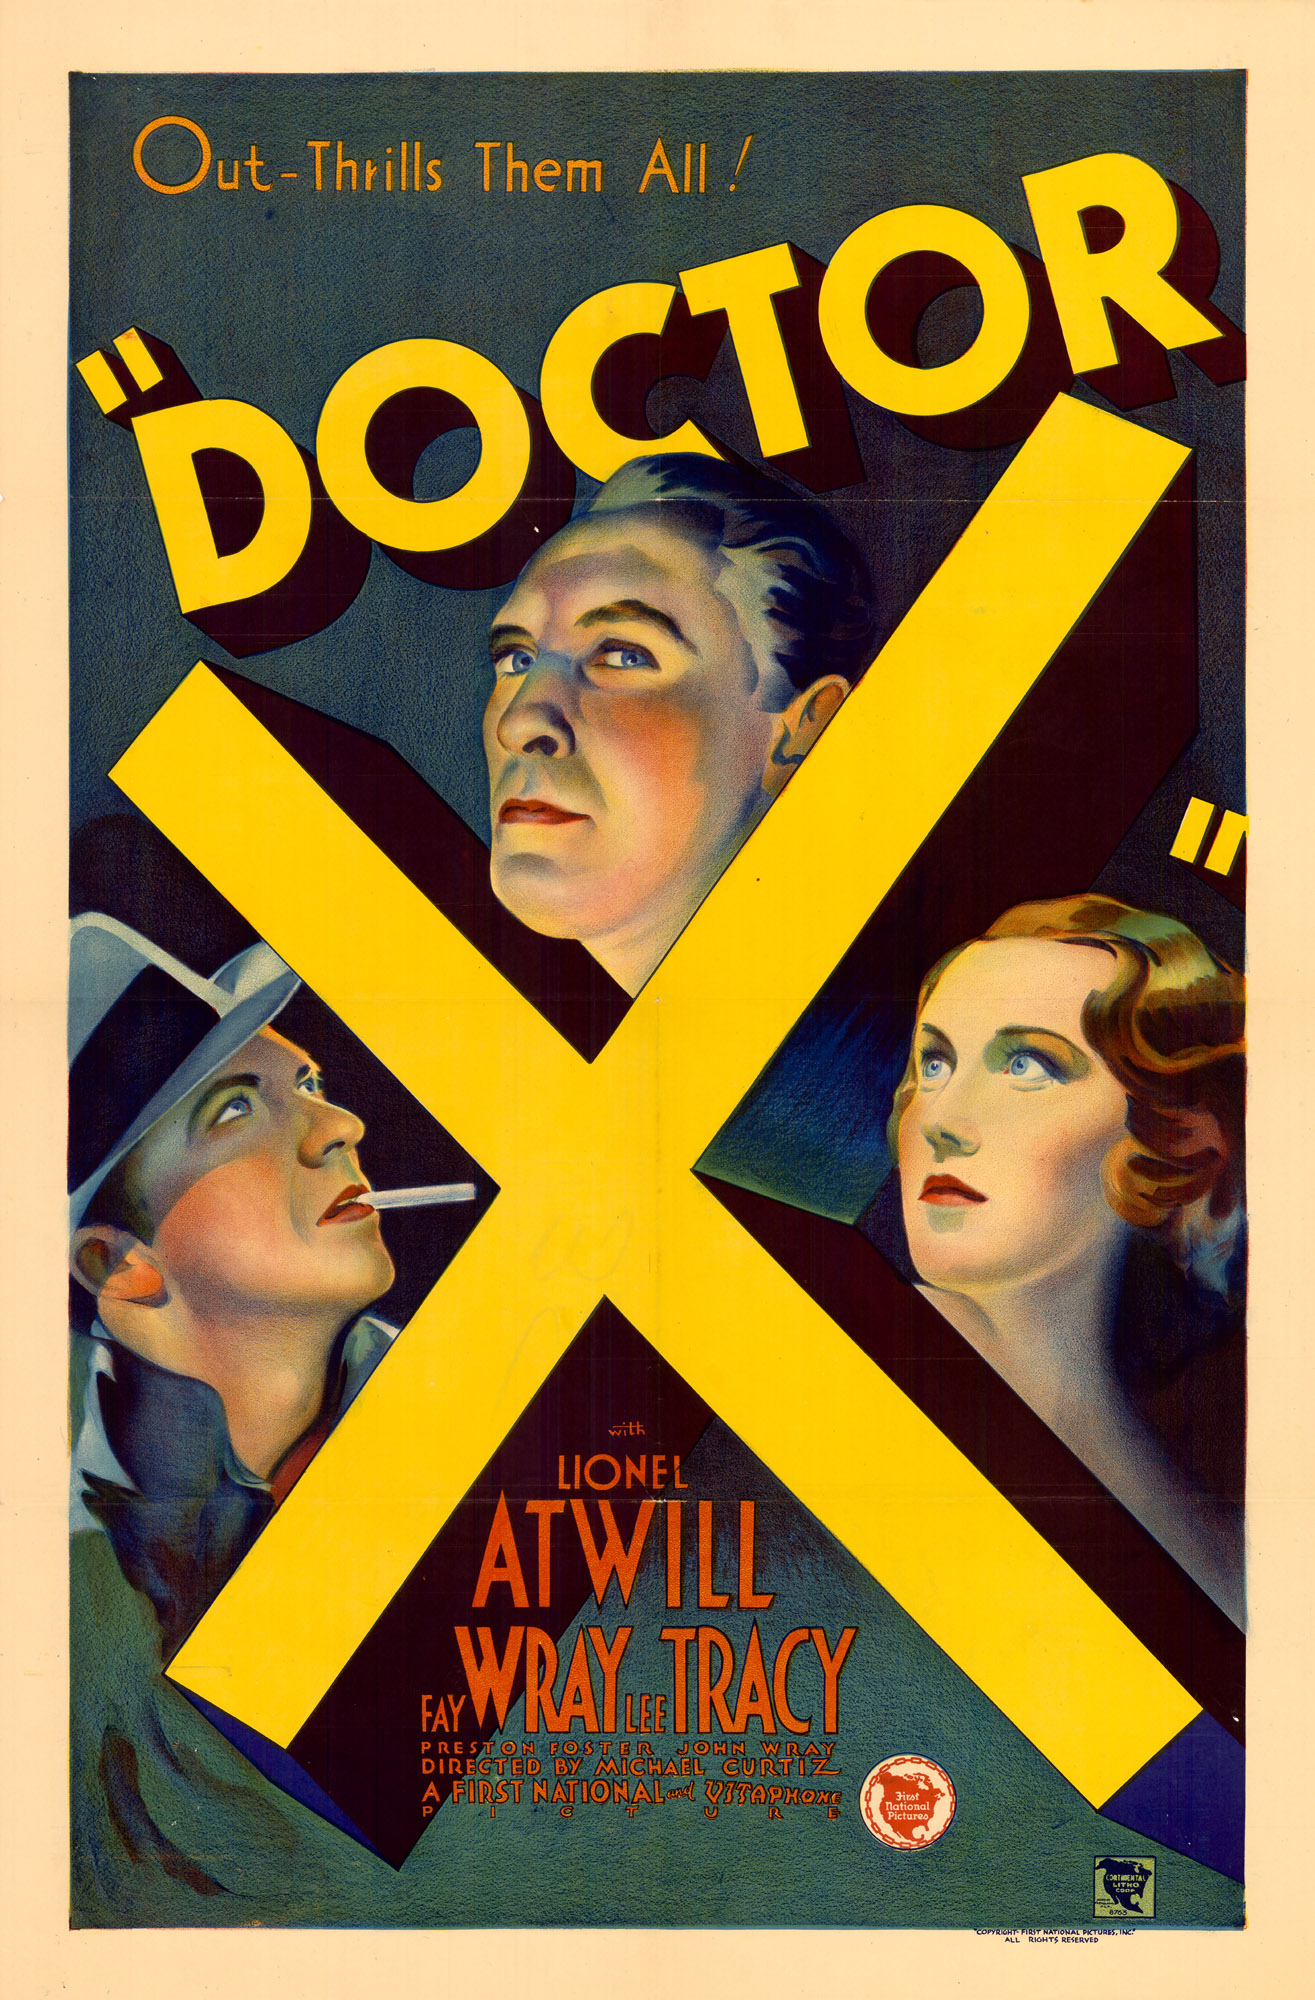 Doctor X (1932) Doctor-x-poster